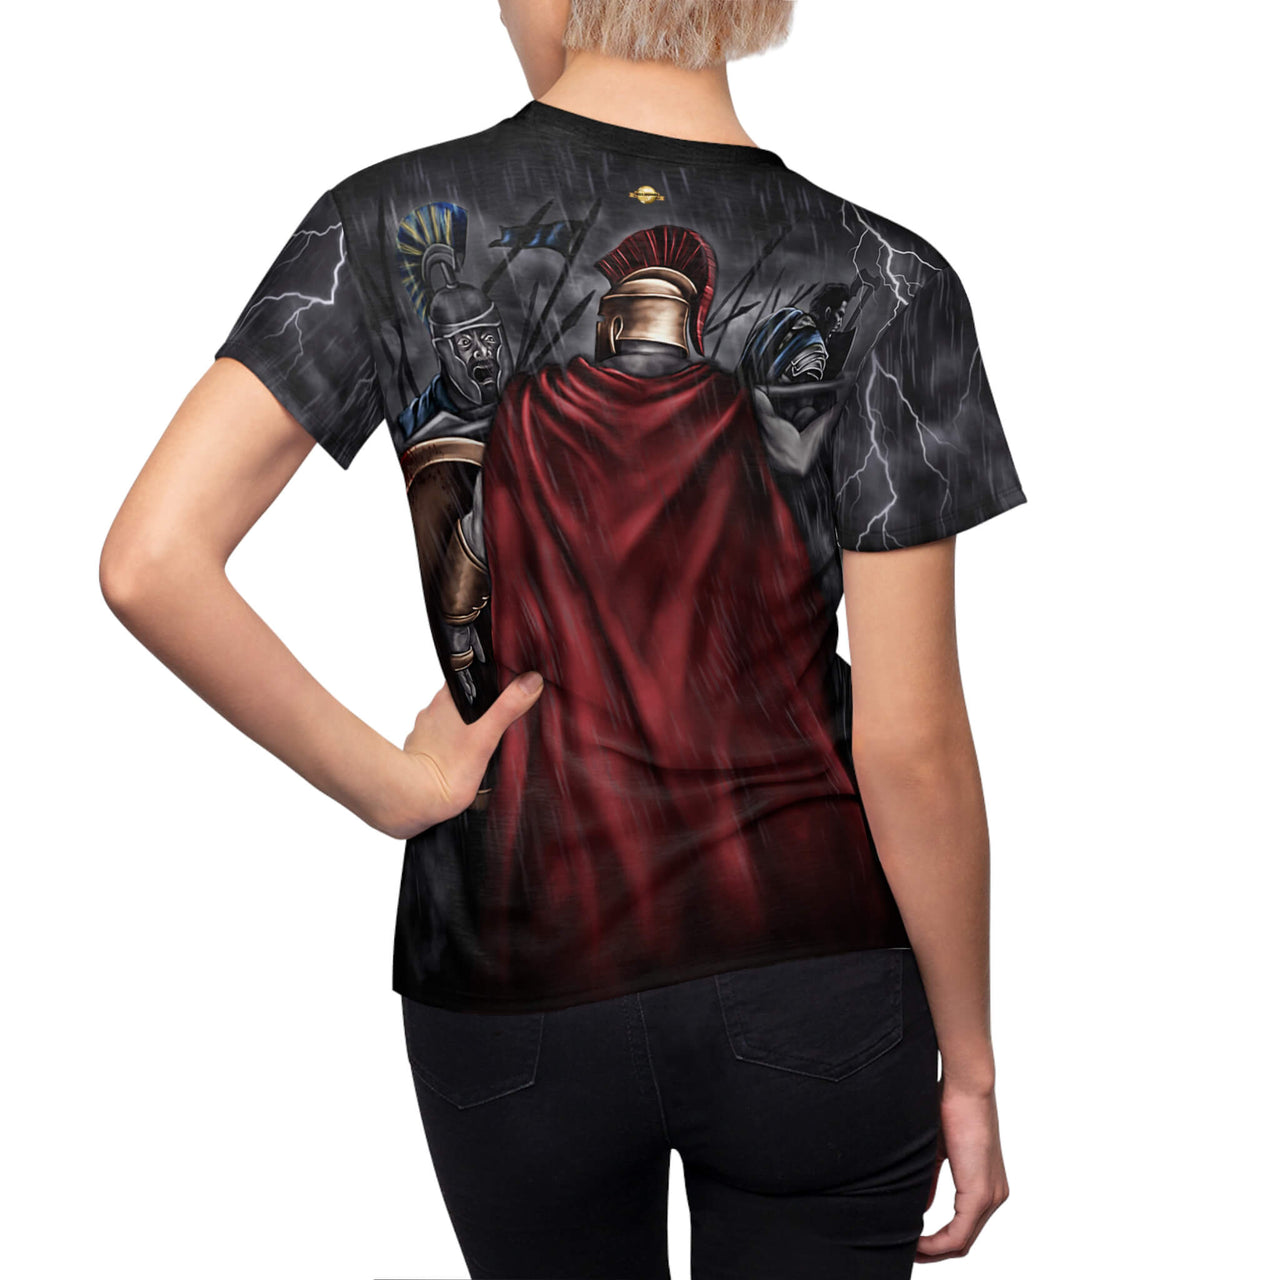 With My Shield or On It - Spartan Warrior - Women's AOP Cut & Sew Tee